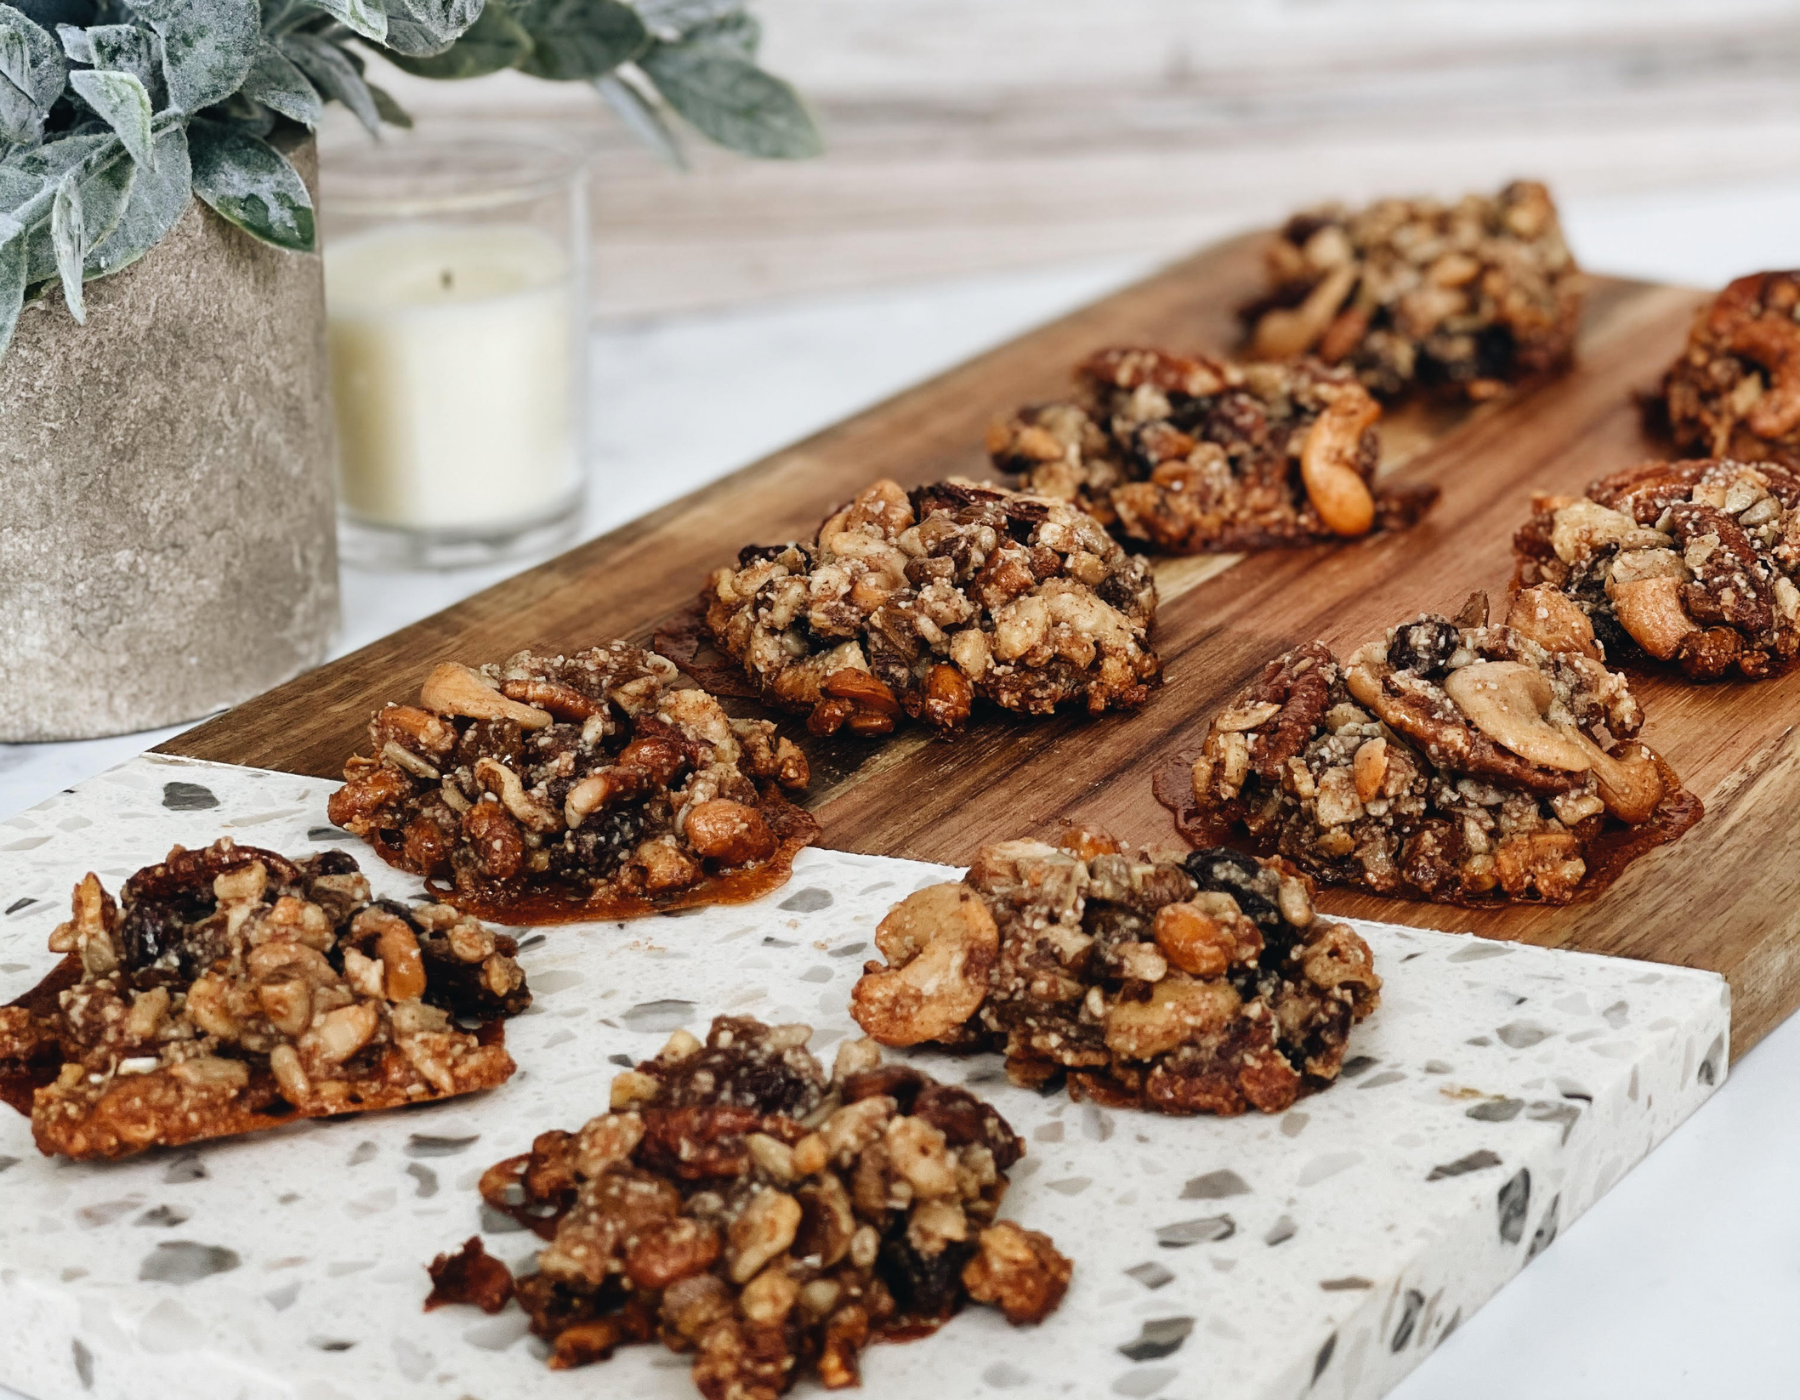 OH-SO-SWEET BUT GOOD-FOR-YOU NUT CLUSTERS